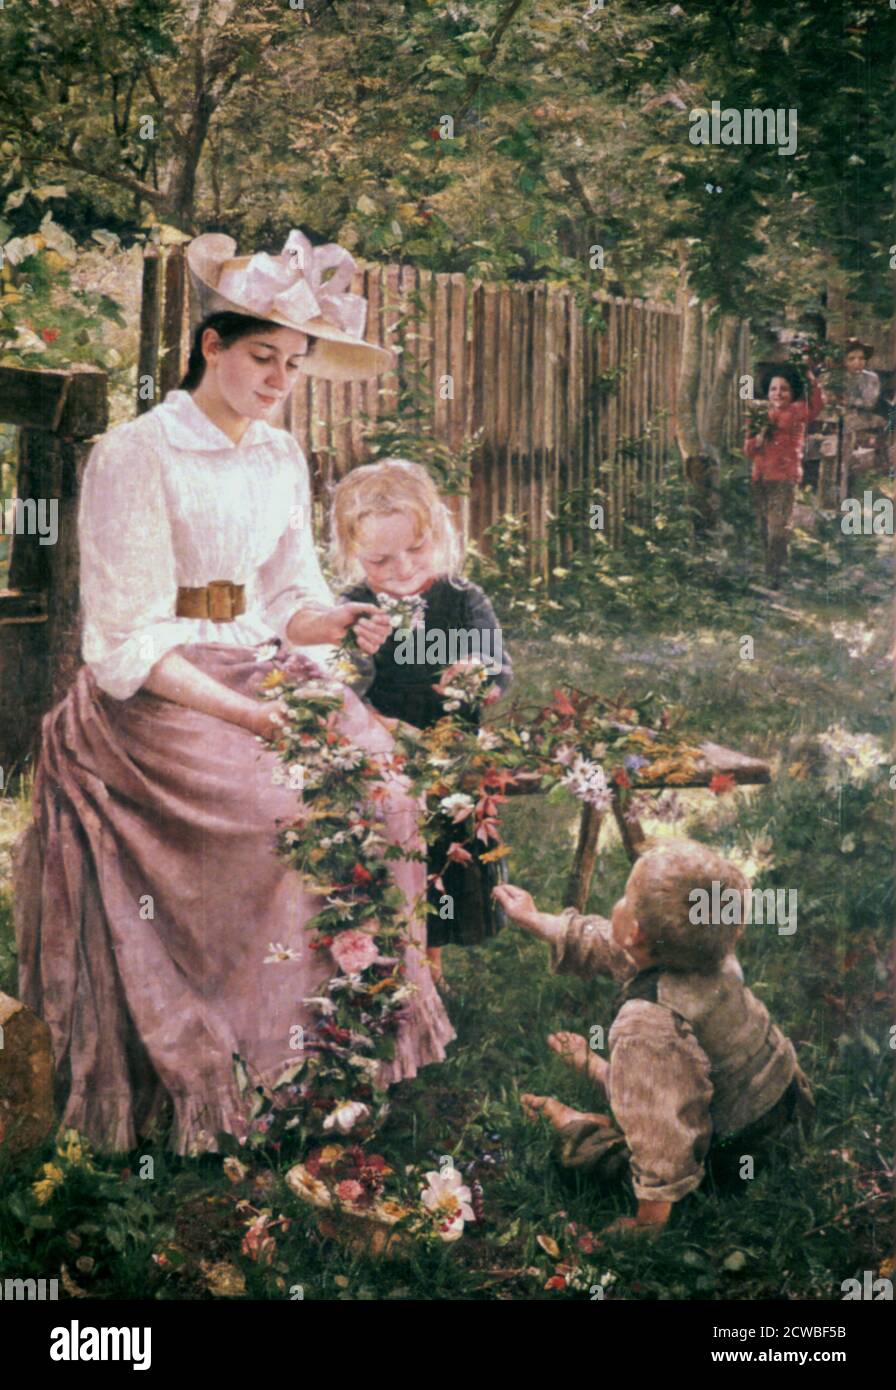 Summer', c1889-1890. Artist: Ivana Kobilca. Ivana Kobilca(1861-1926) is the most prominent Slovene female painter. She was a realist painter who studied and worked in Vienna, Munich, Paris, and Berlin. Stock Photo